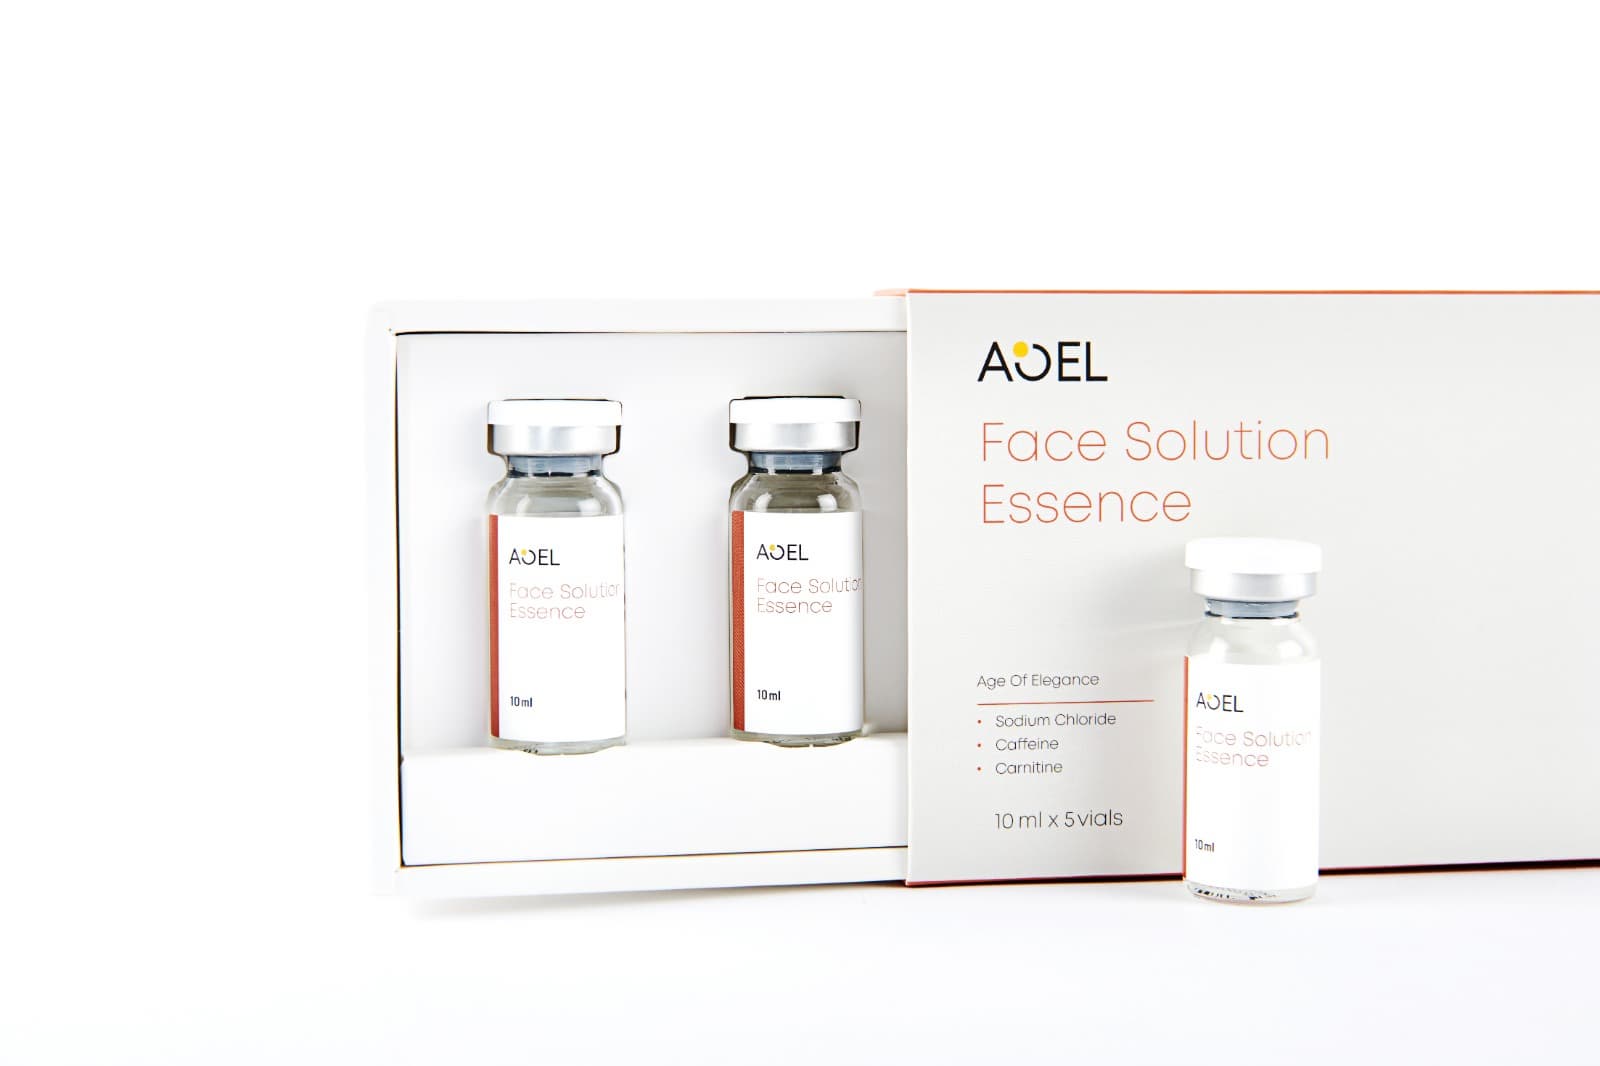 AOEL Face Solution Essence